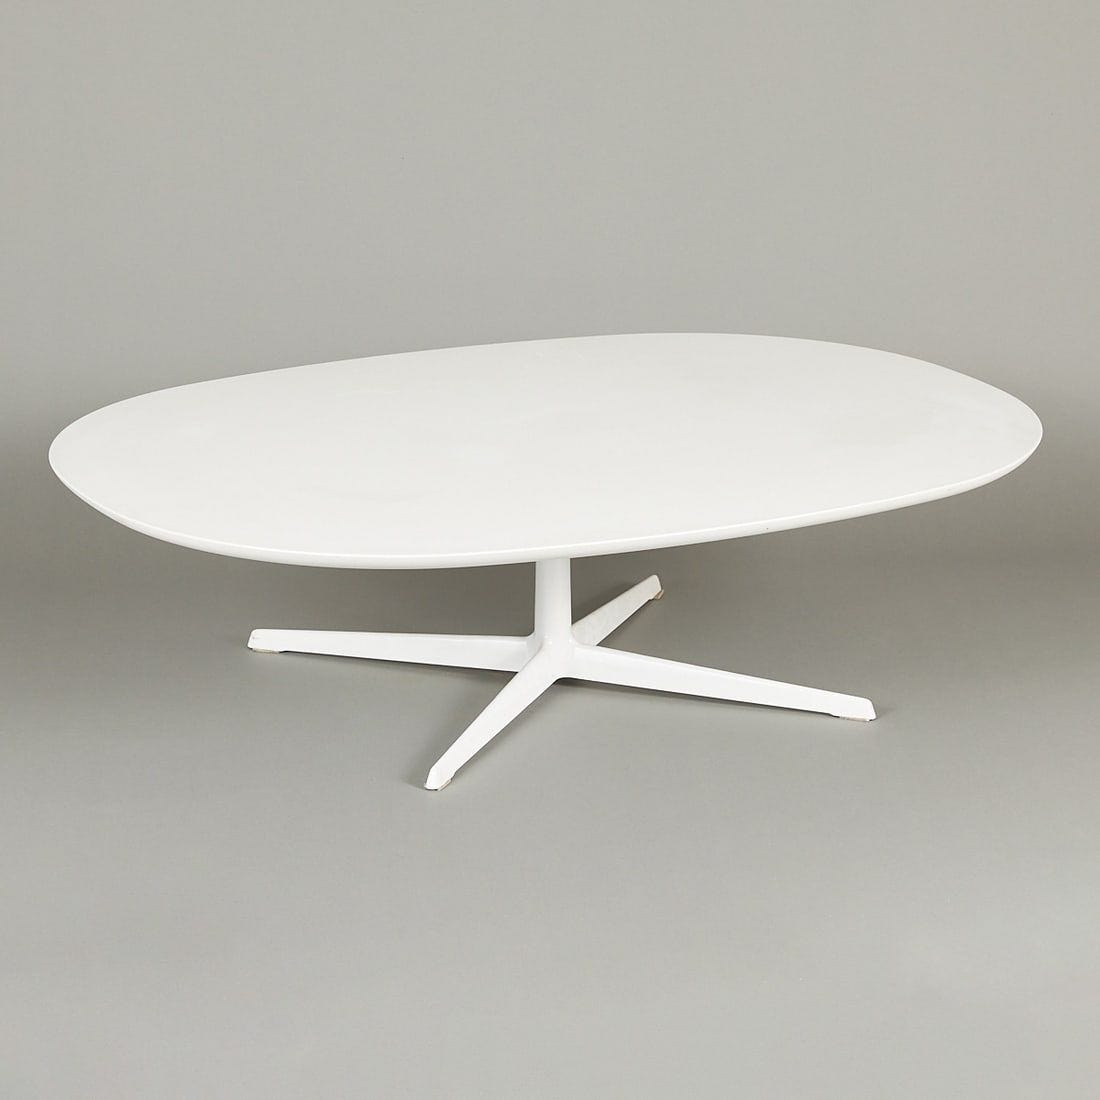 Arper Eolo Coffee Table by Lievore Altherr Molina